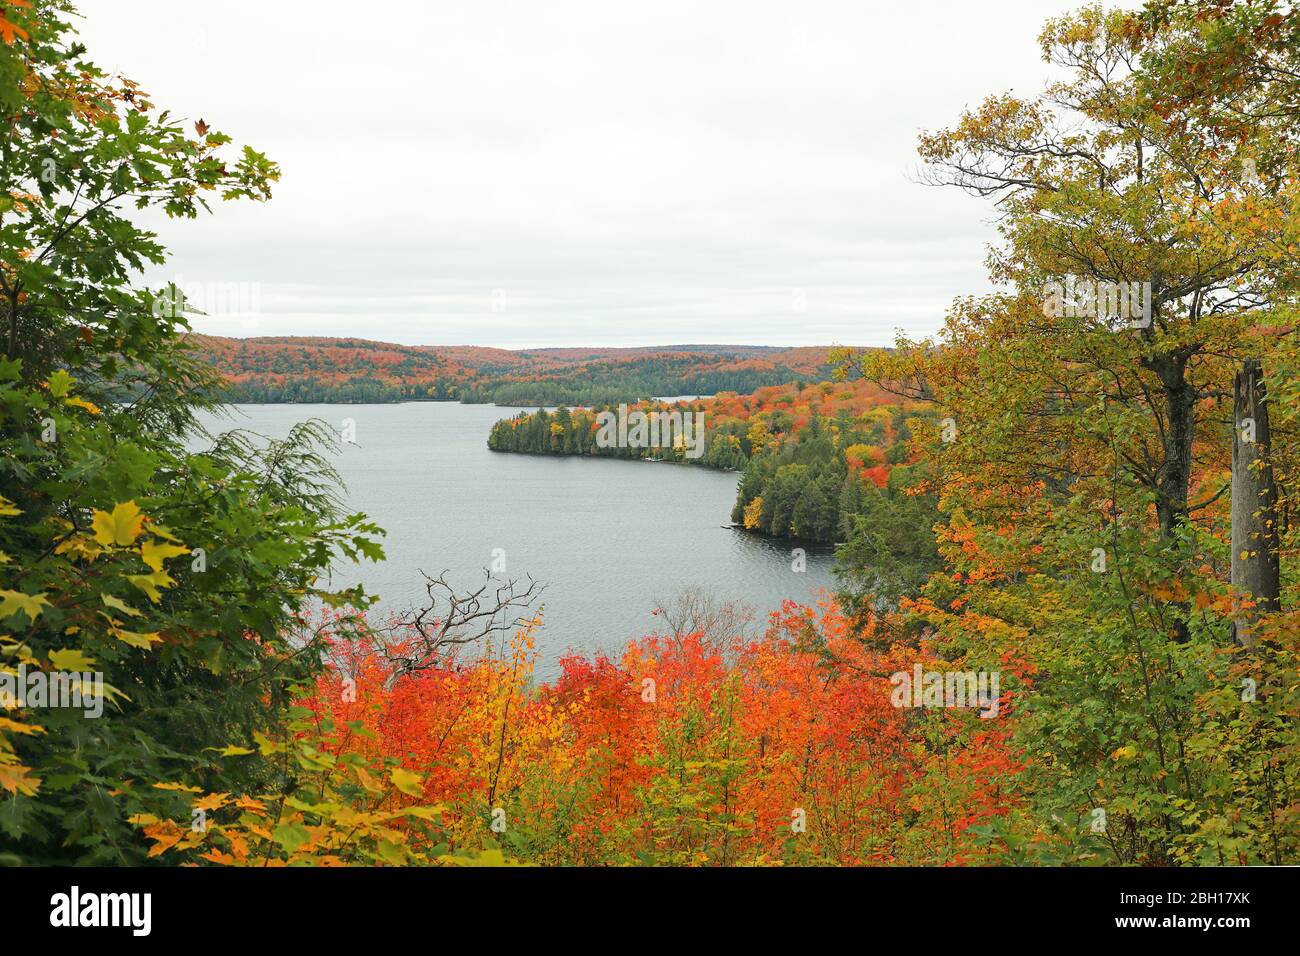 colouring of the leaves in autumn at Peck Lake, Canada, Ontario, Algonquin Provincial Park Stock Photo